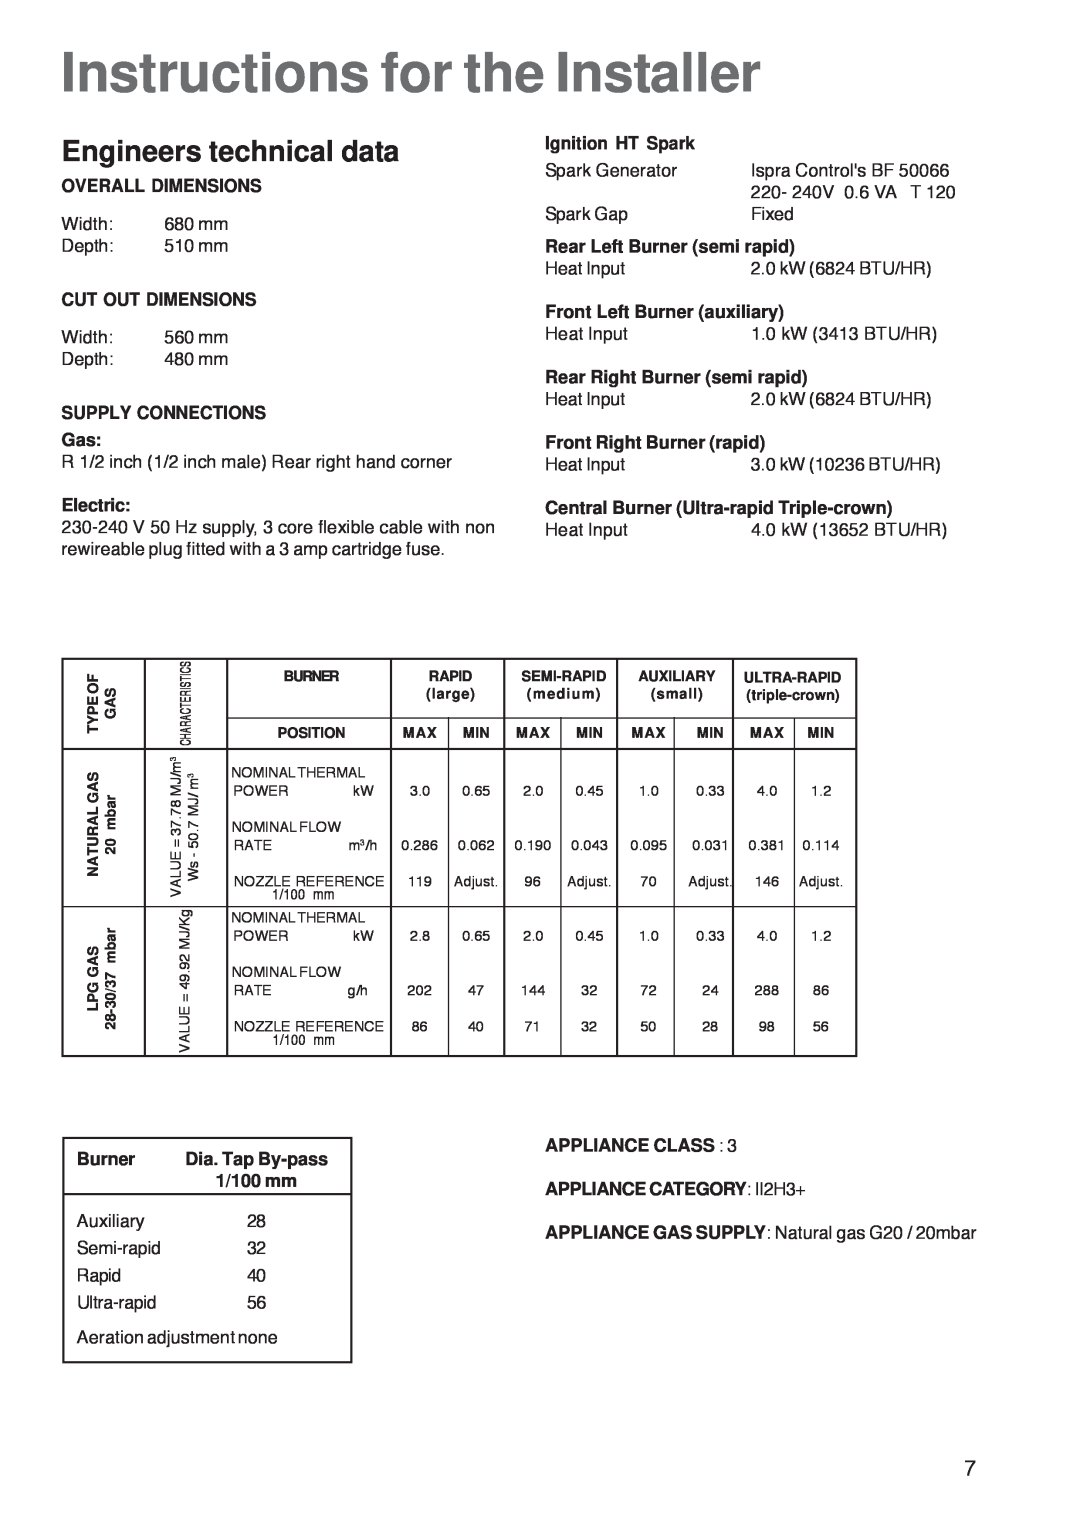 Zanussi ZGF 7820 Instructions for the Installer, Engineers technical data, Overall Dimensions, Cut Out Dimensions, Burner 